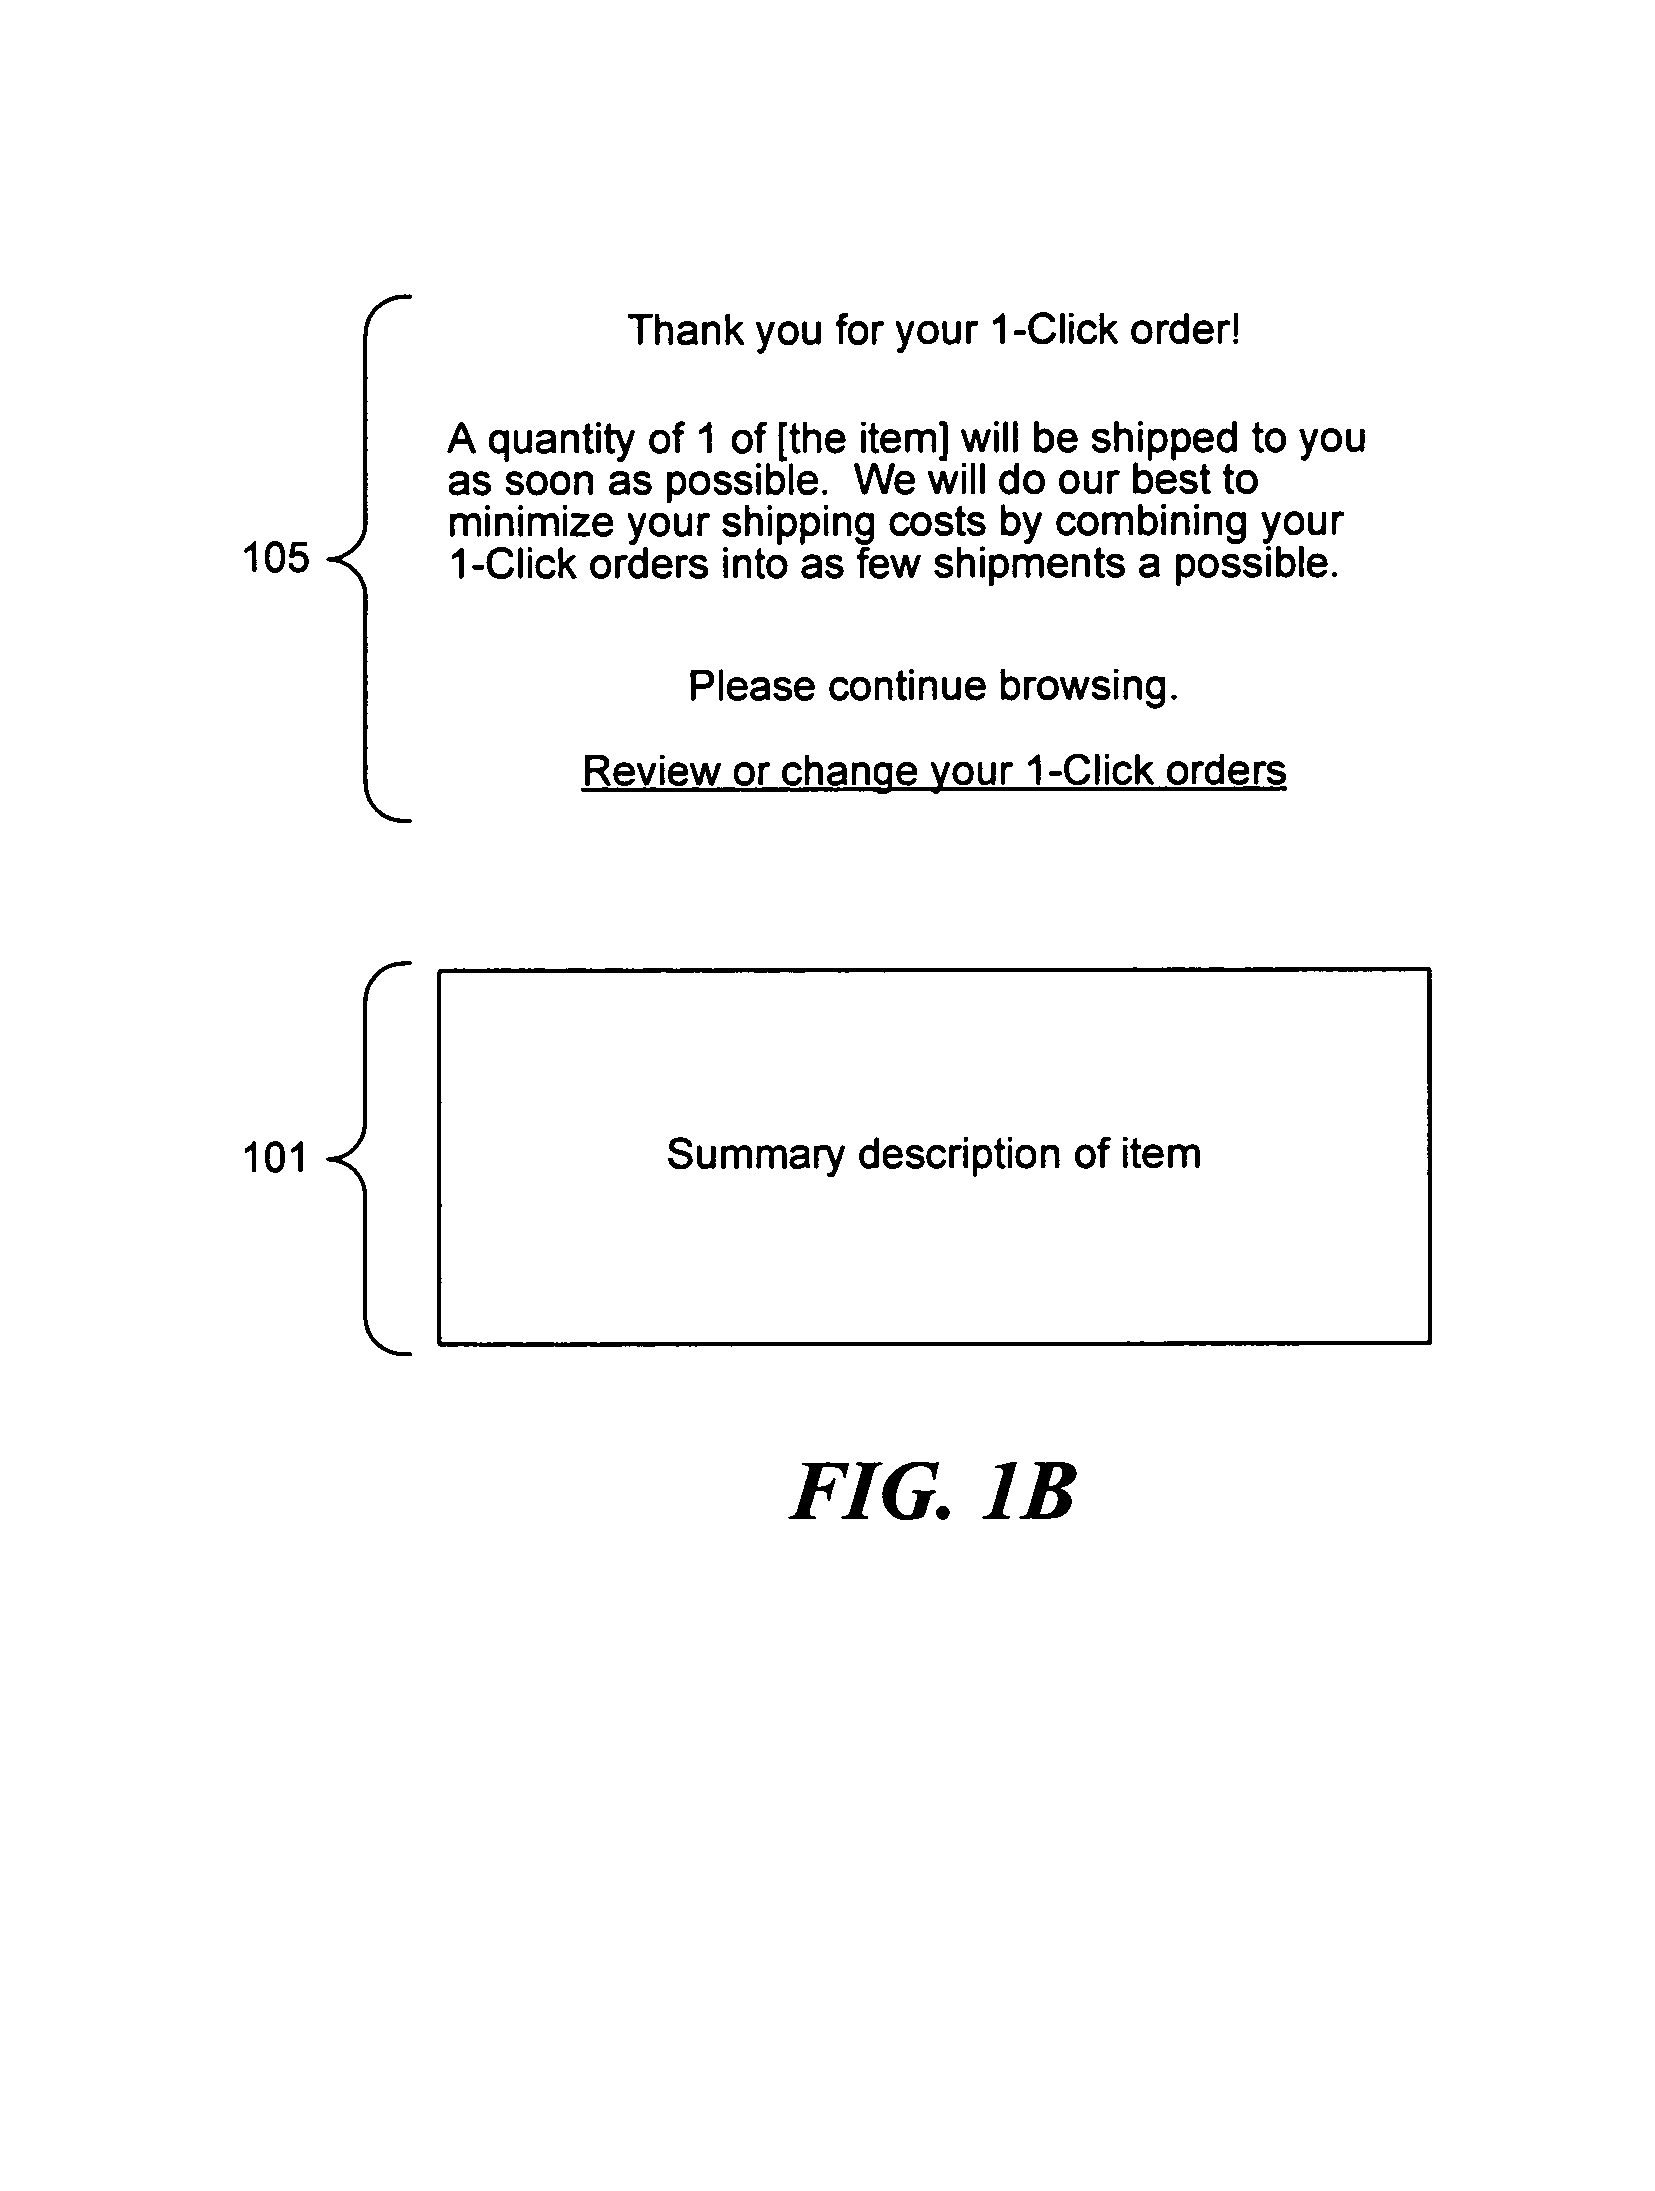 Method and system for placing a purchase order via a communications network